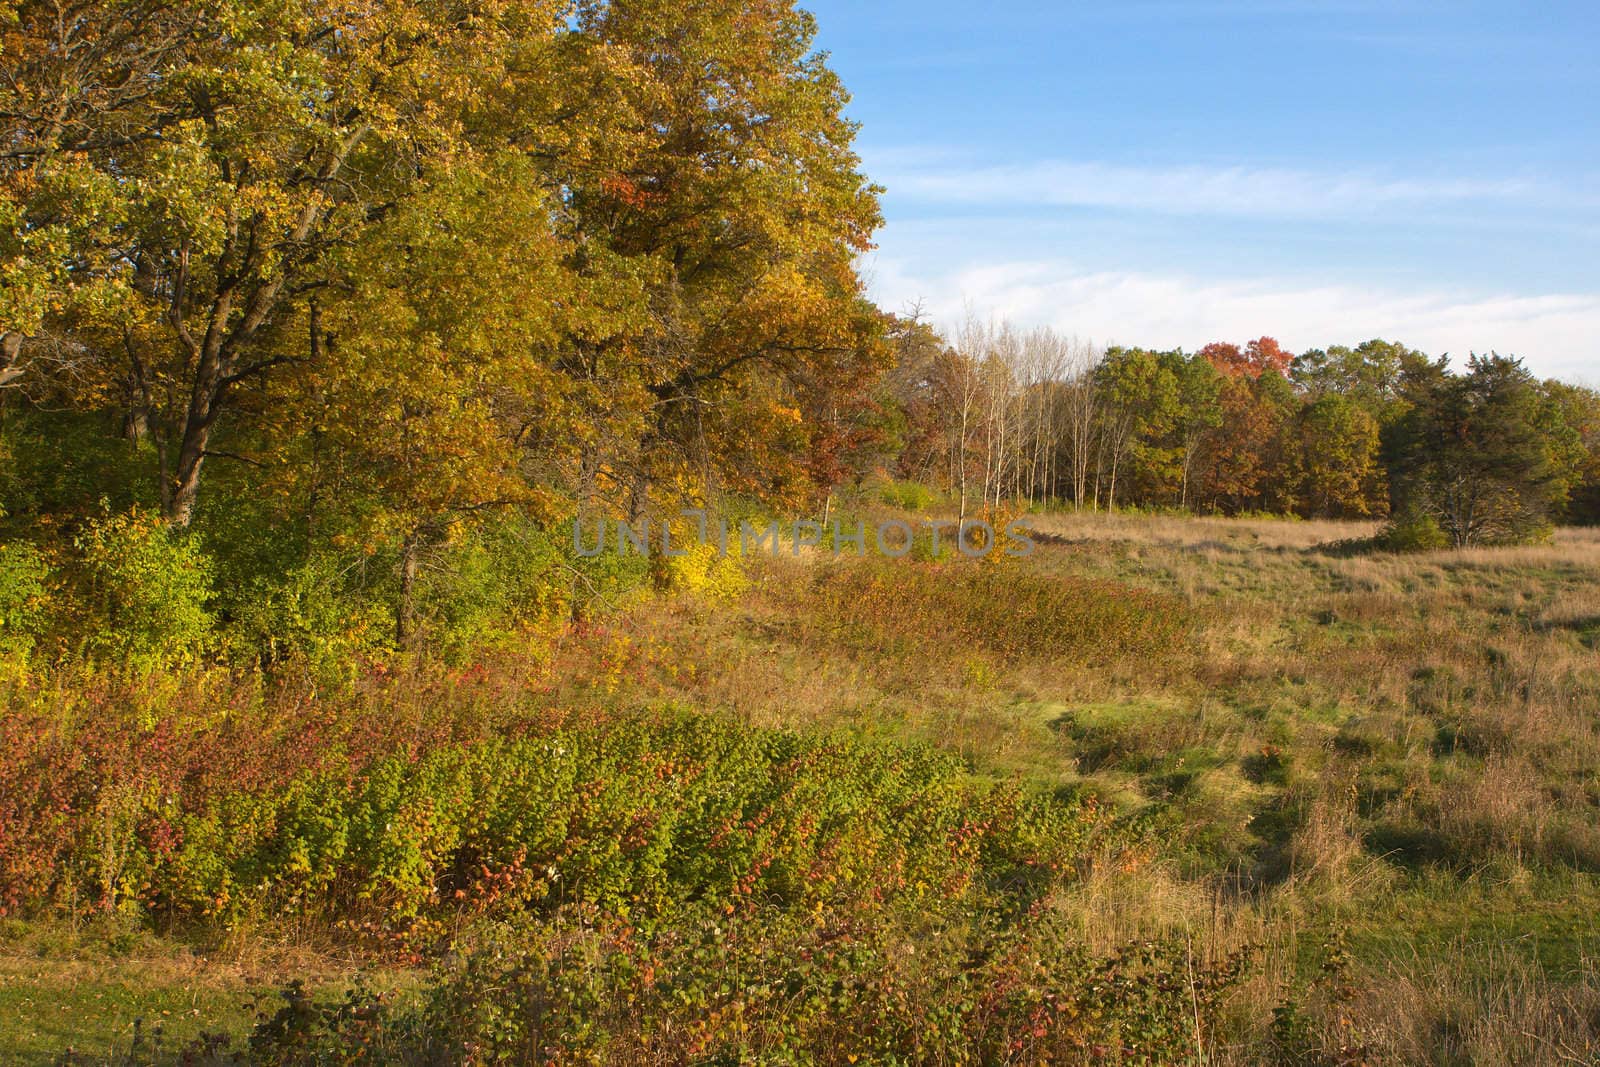 Colorful meadow and trees of autumn foliage.